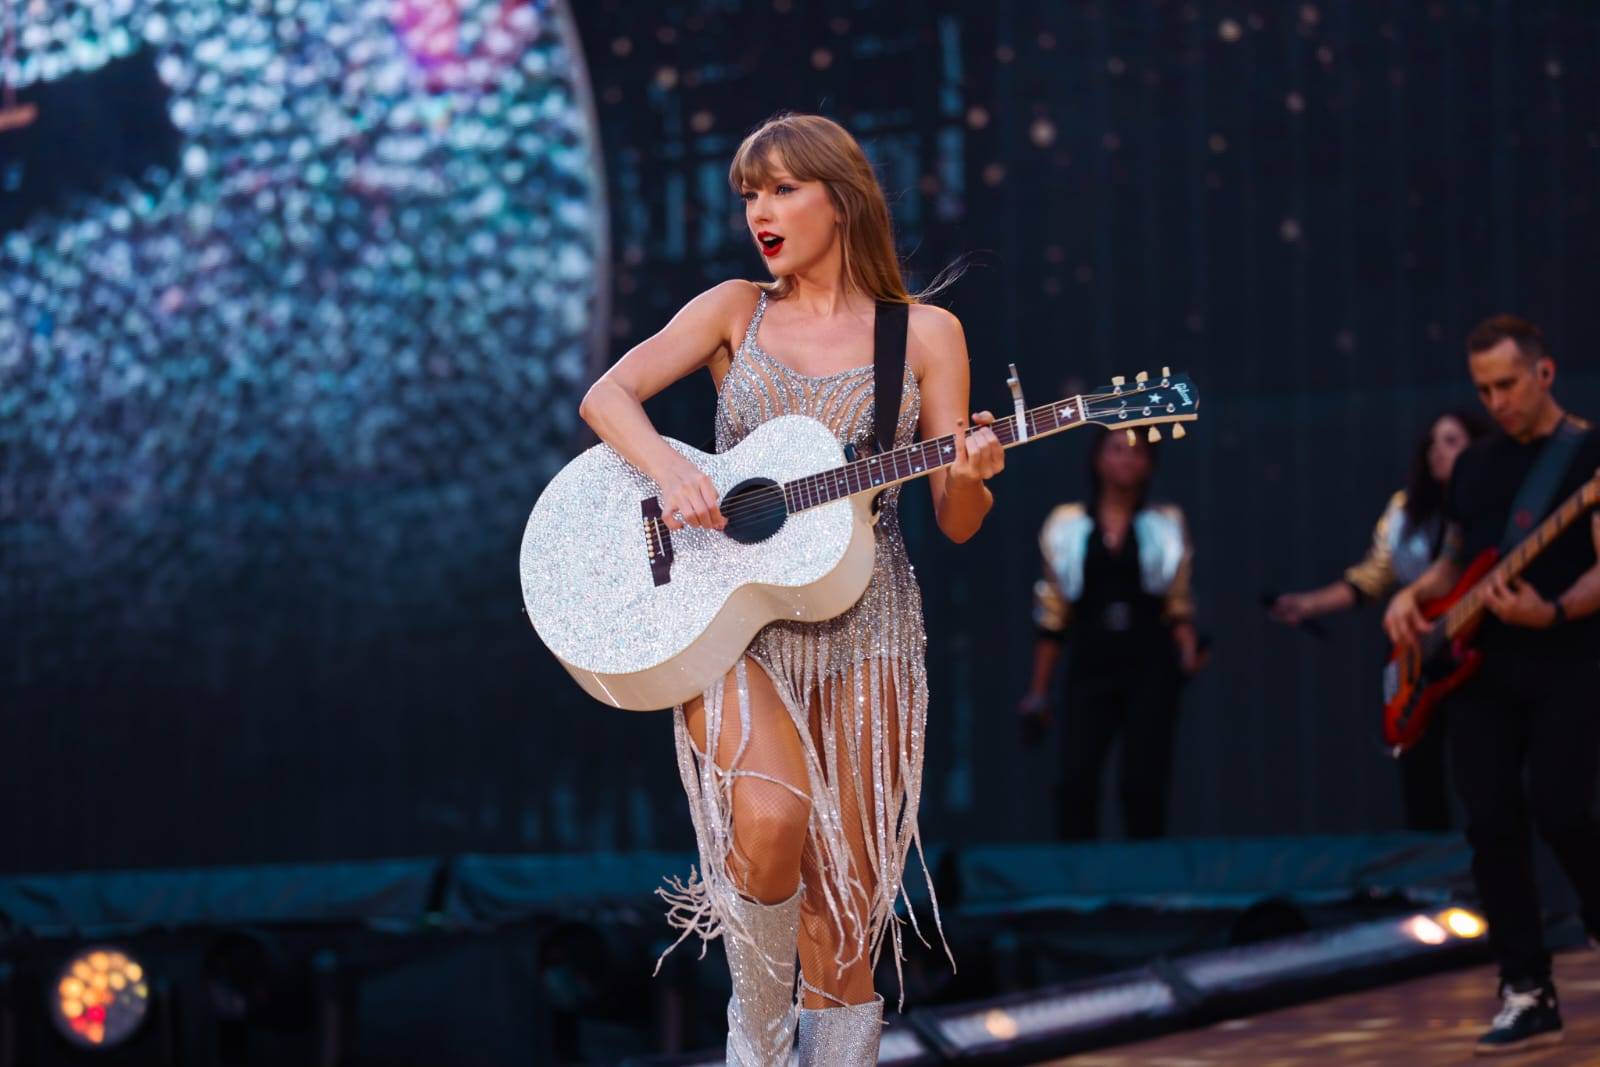 Taylor Swift ‘Era’s Tour’ At Santa Clara Levi’s Stadium: Full Schedule With All Songs